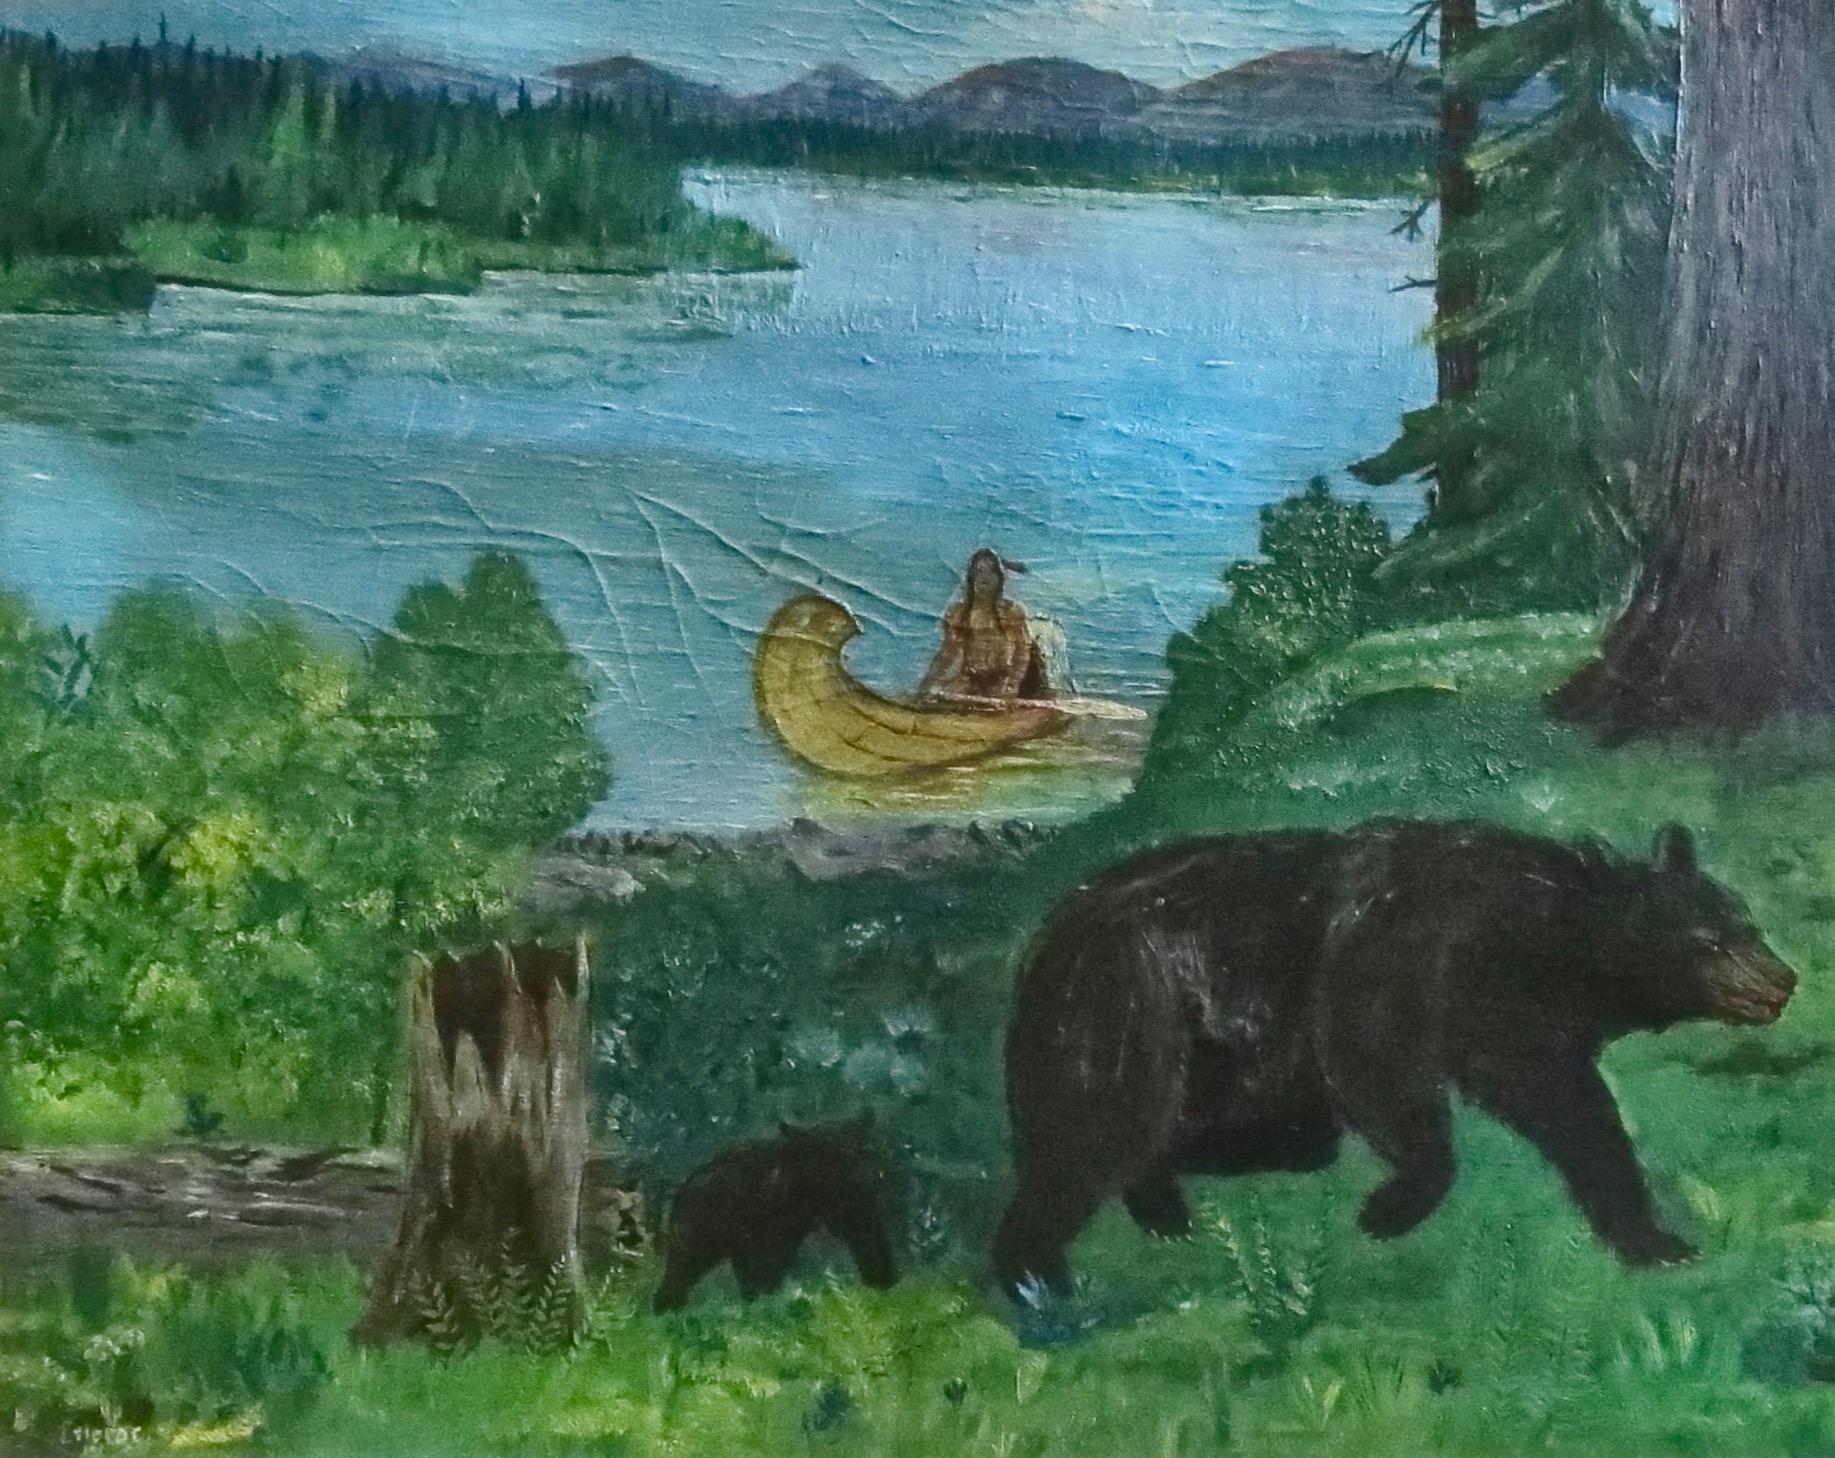 Oiled Early Canadian Landscape Indian and Bear Themed Painting Signed and Dated 